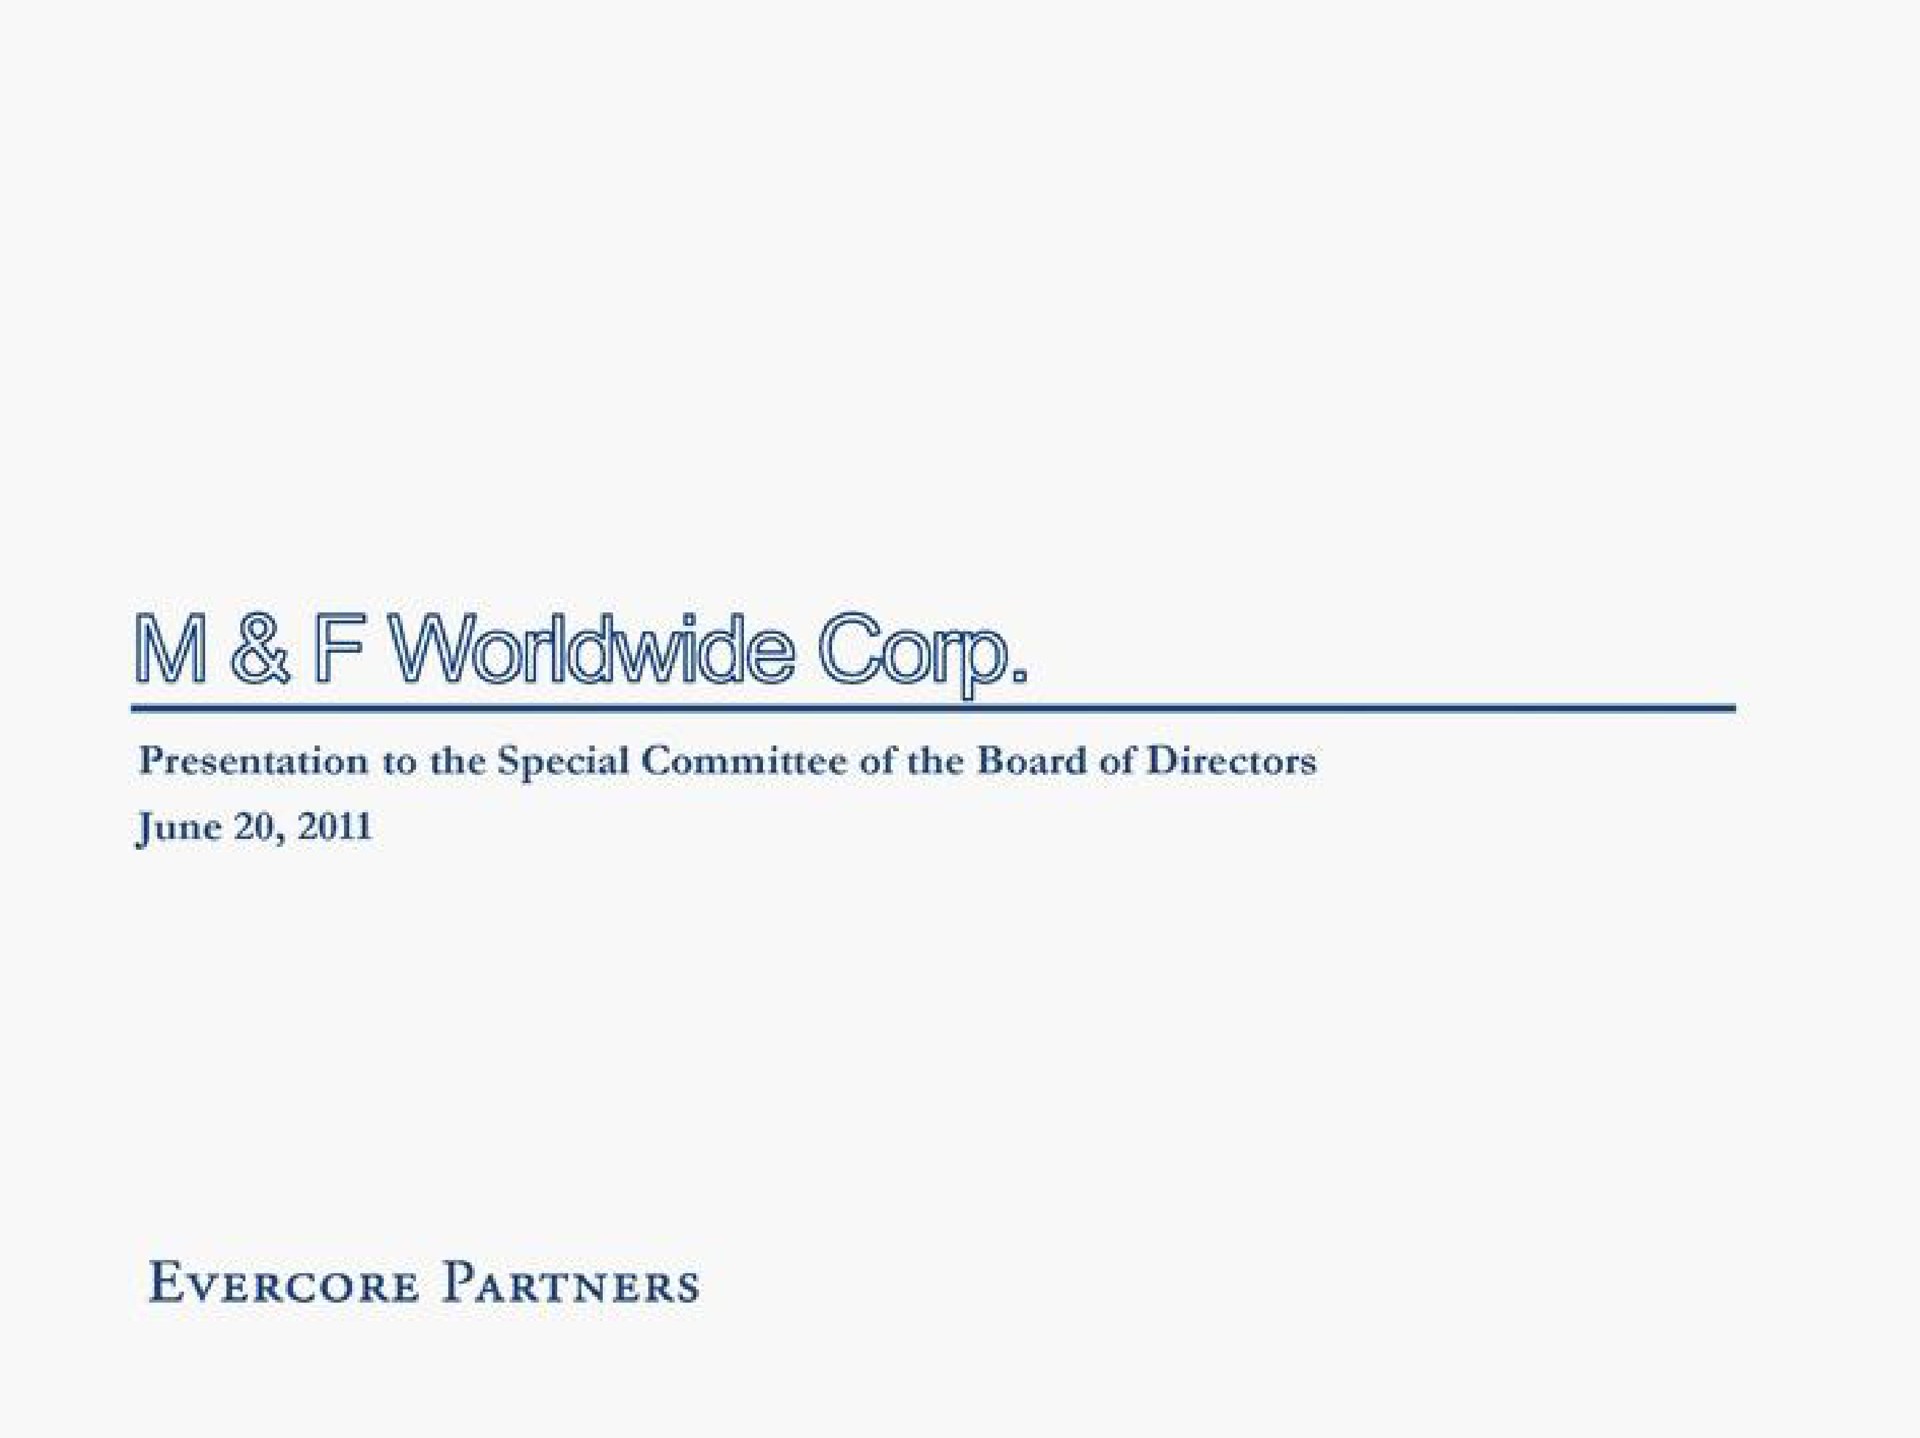 corp presentation to the special committee of the board of directors june partners | Evercore